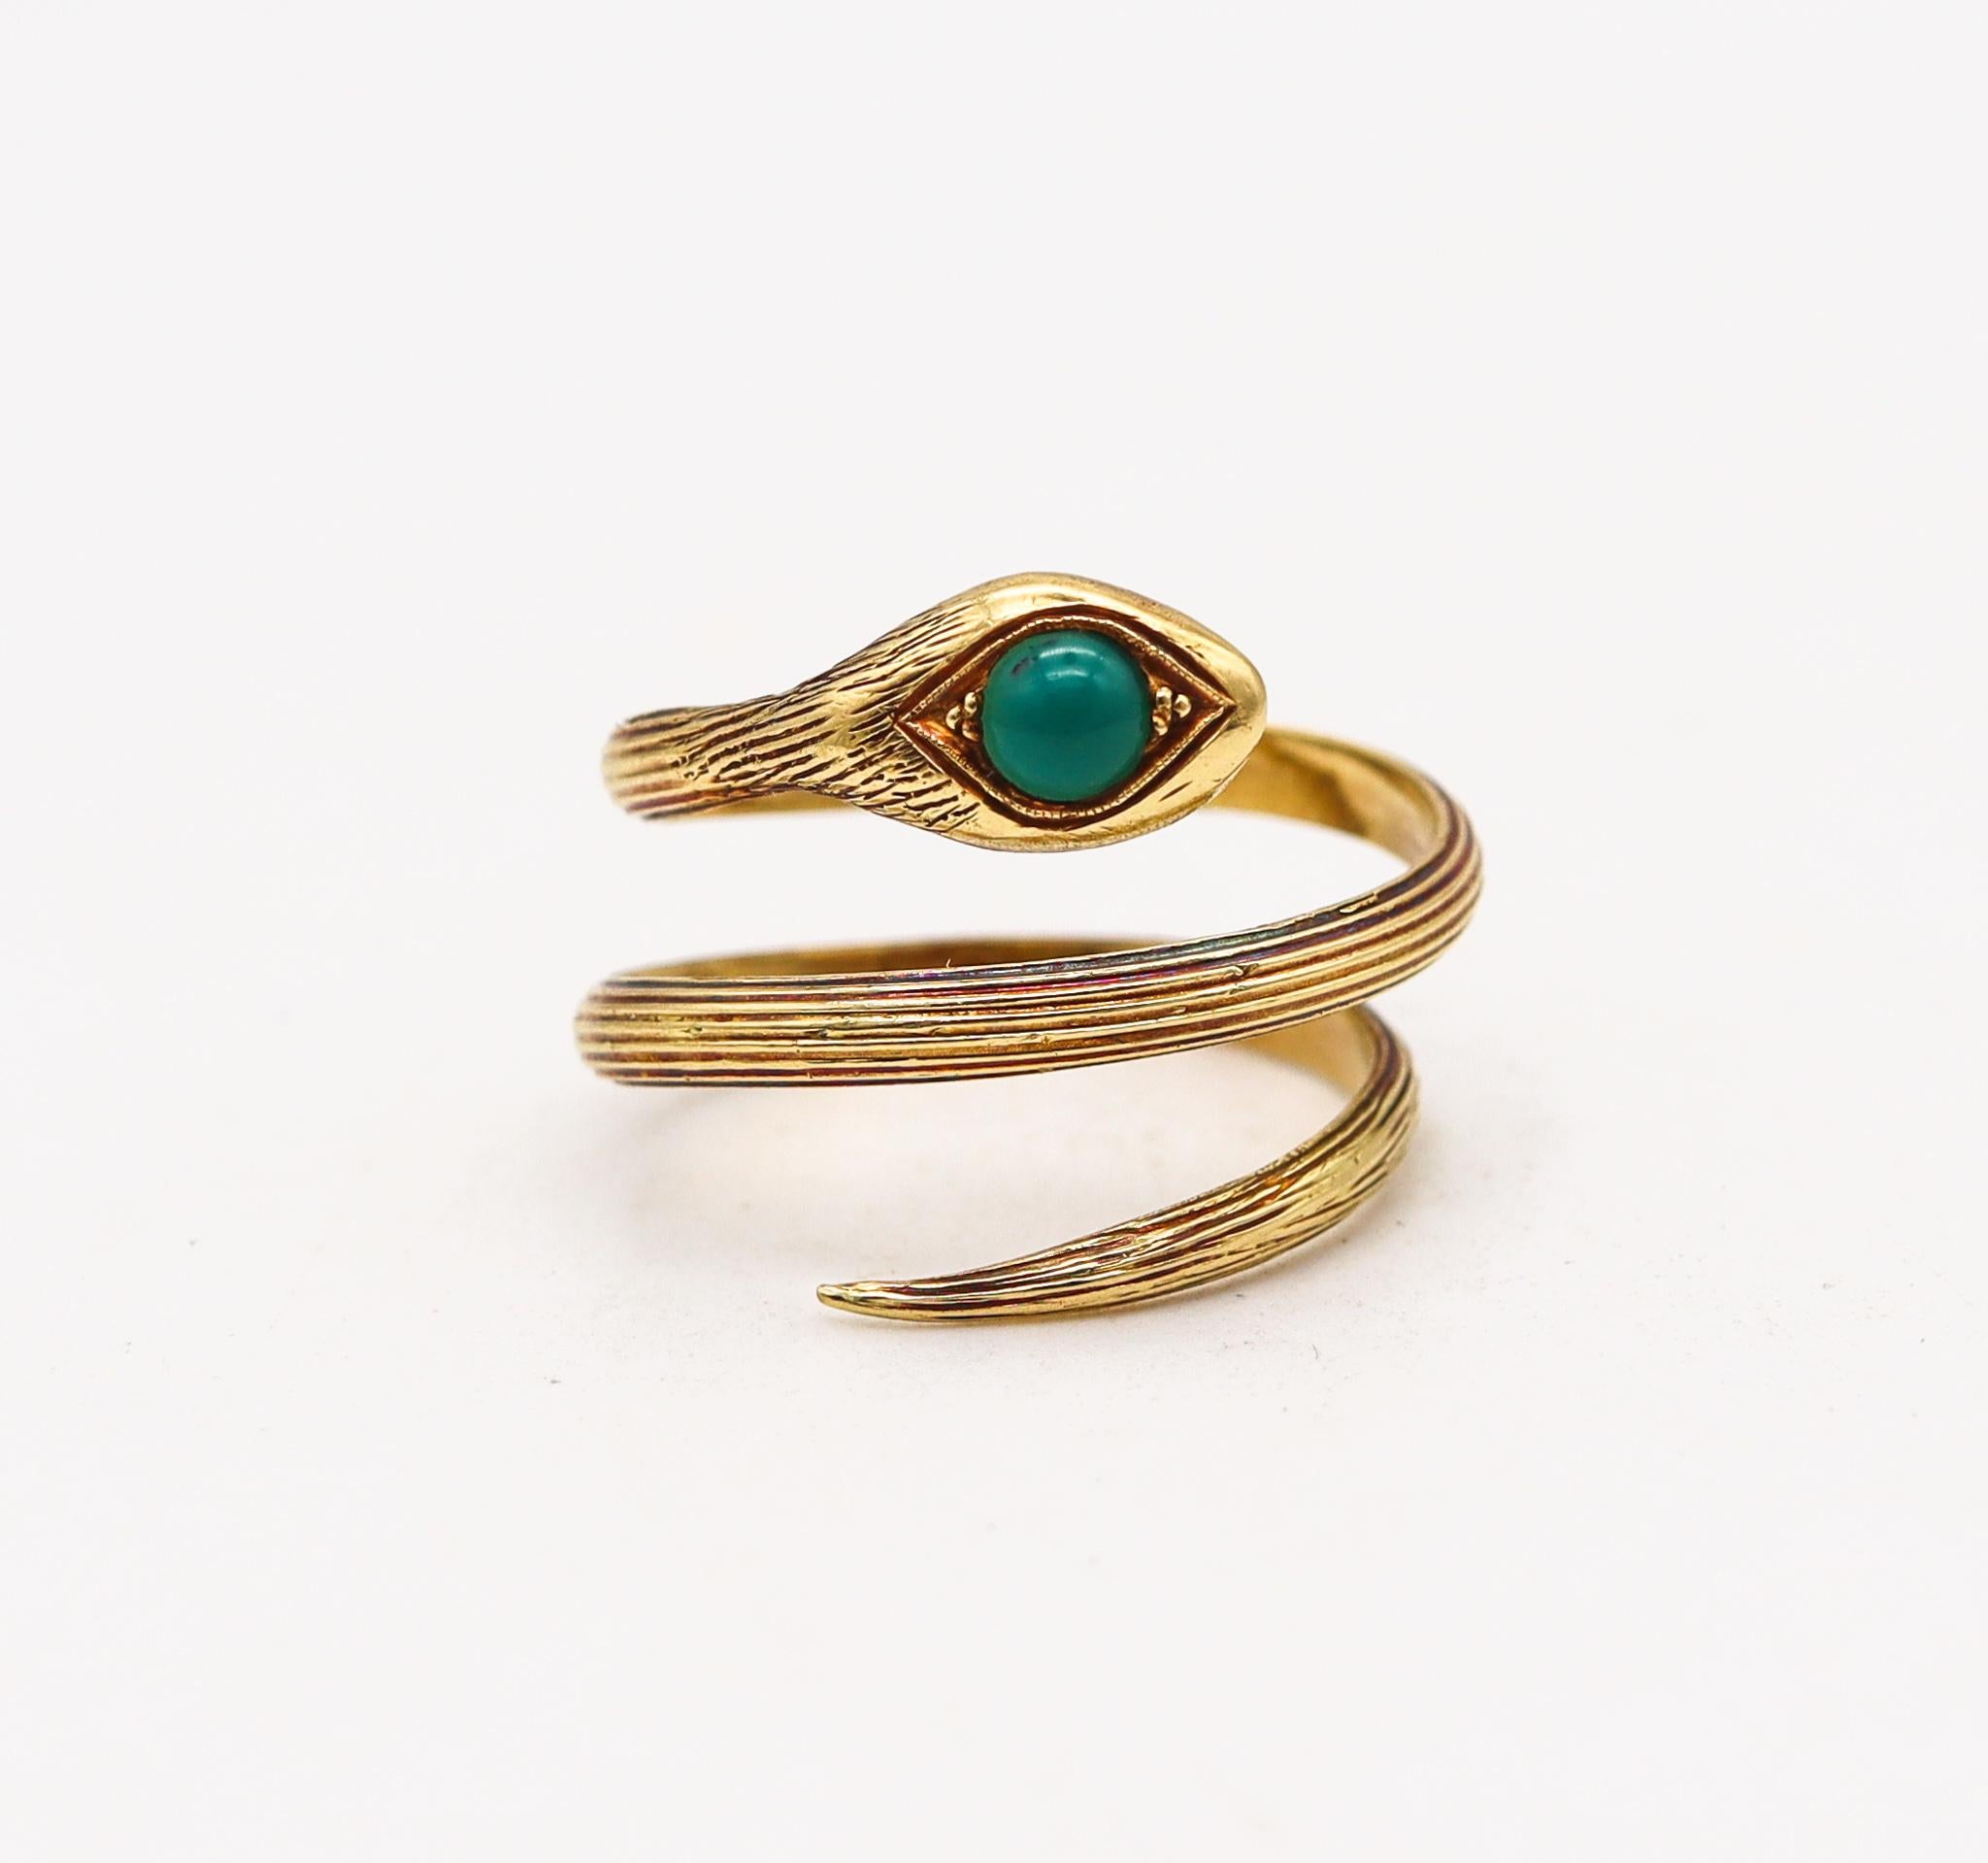 Round Cut French Art Nouveau 1915 Snake Ring in 18Kt Yellow Gold with Round Chrysoprase